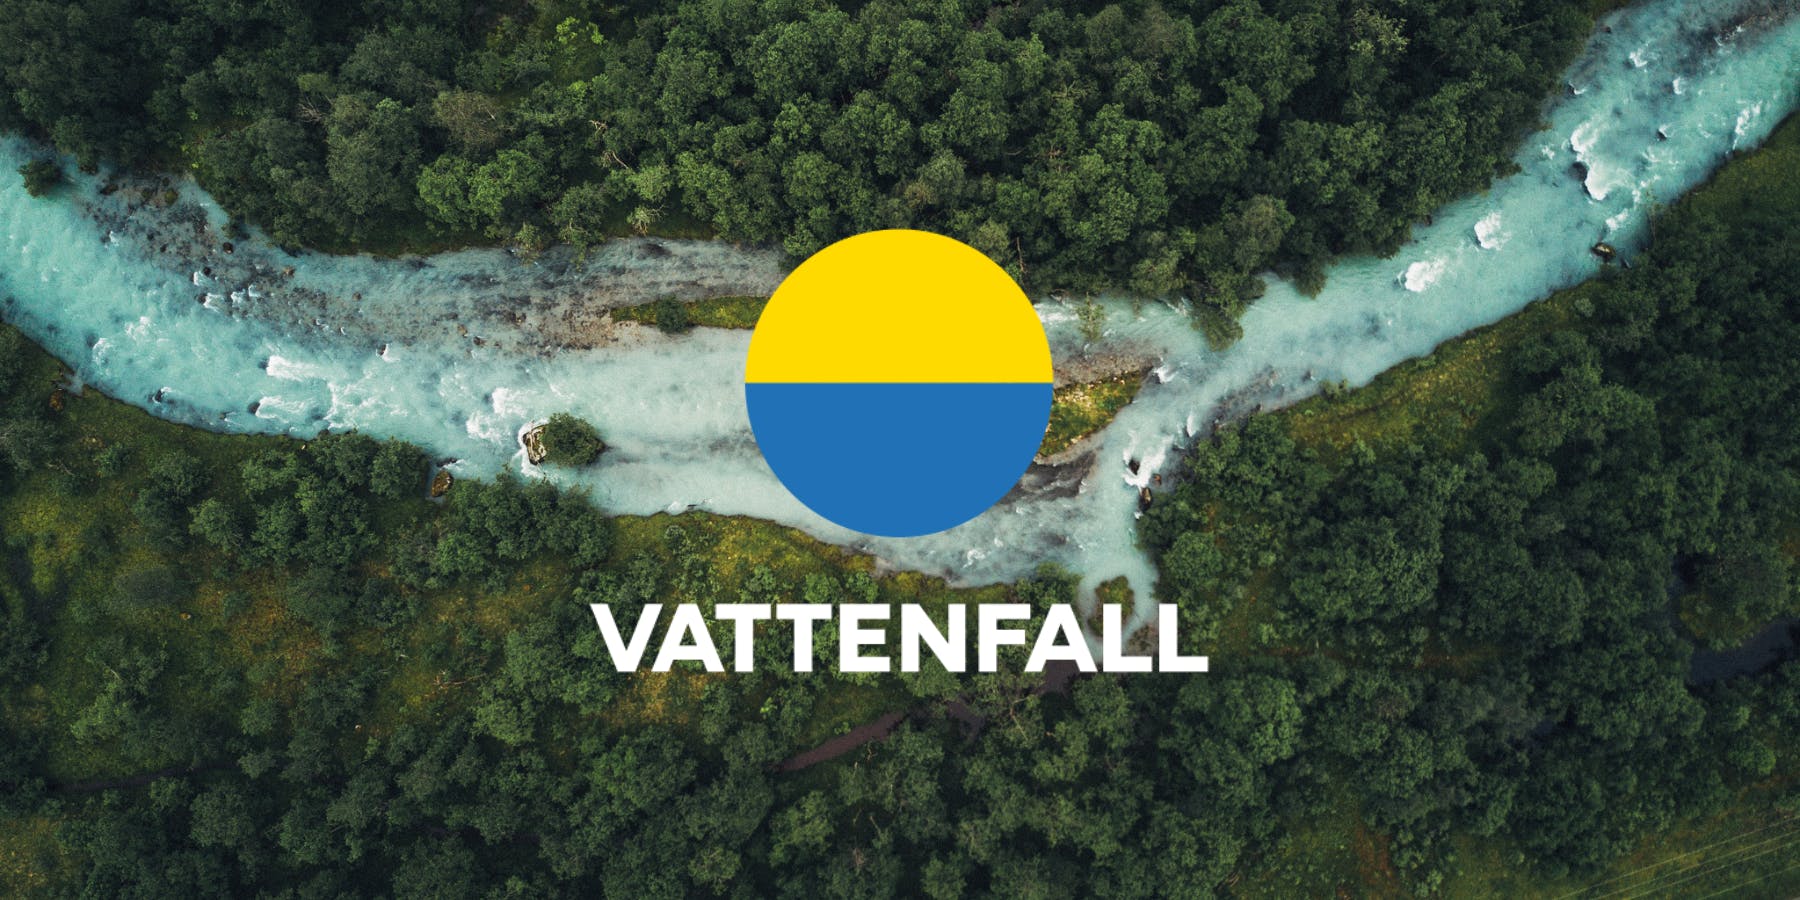 Press Release: Vattenfall Becomes Latest Member of the SDIA